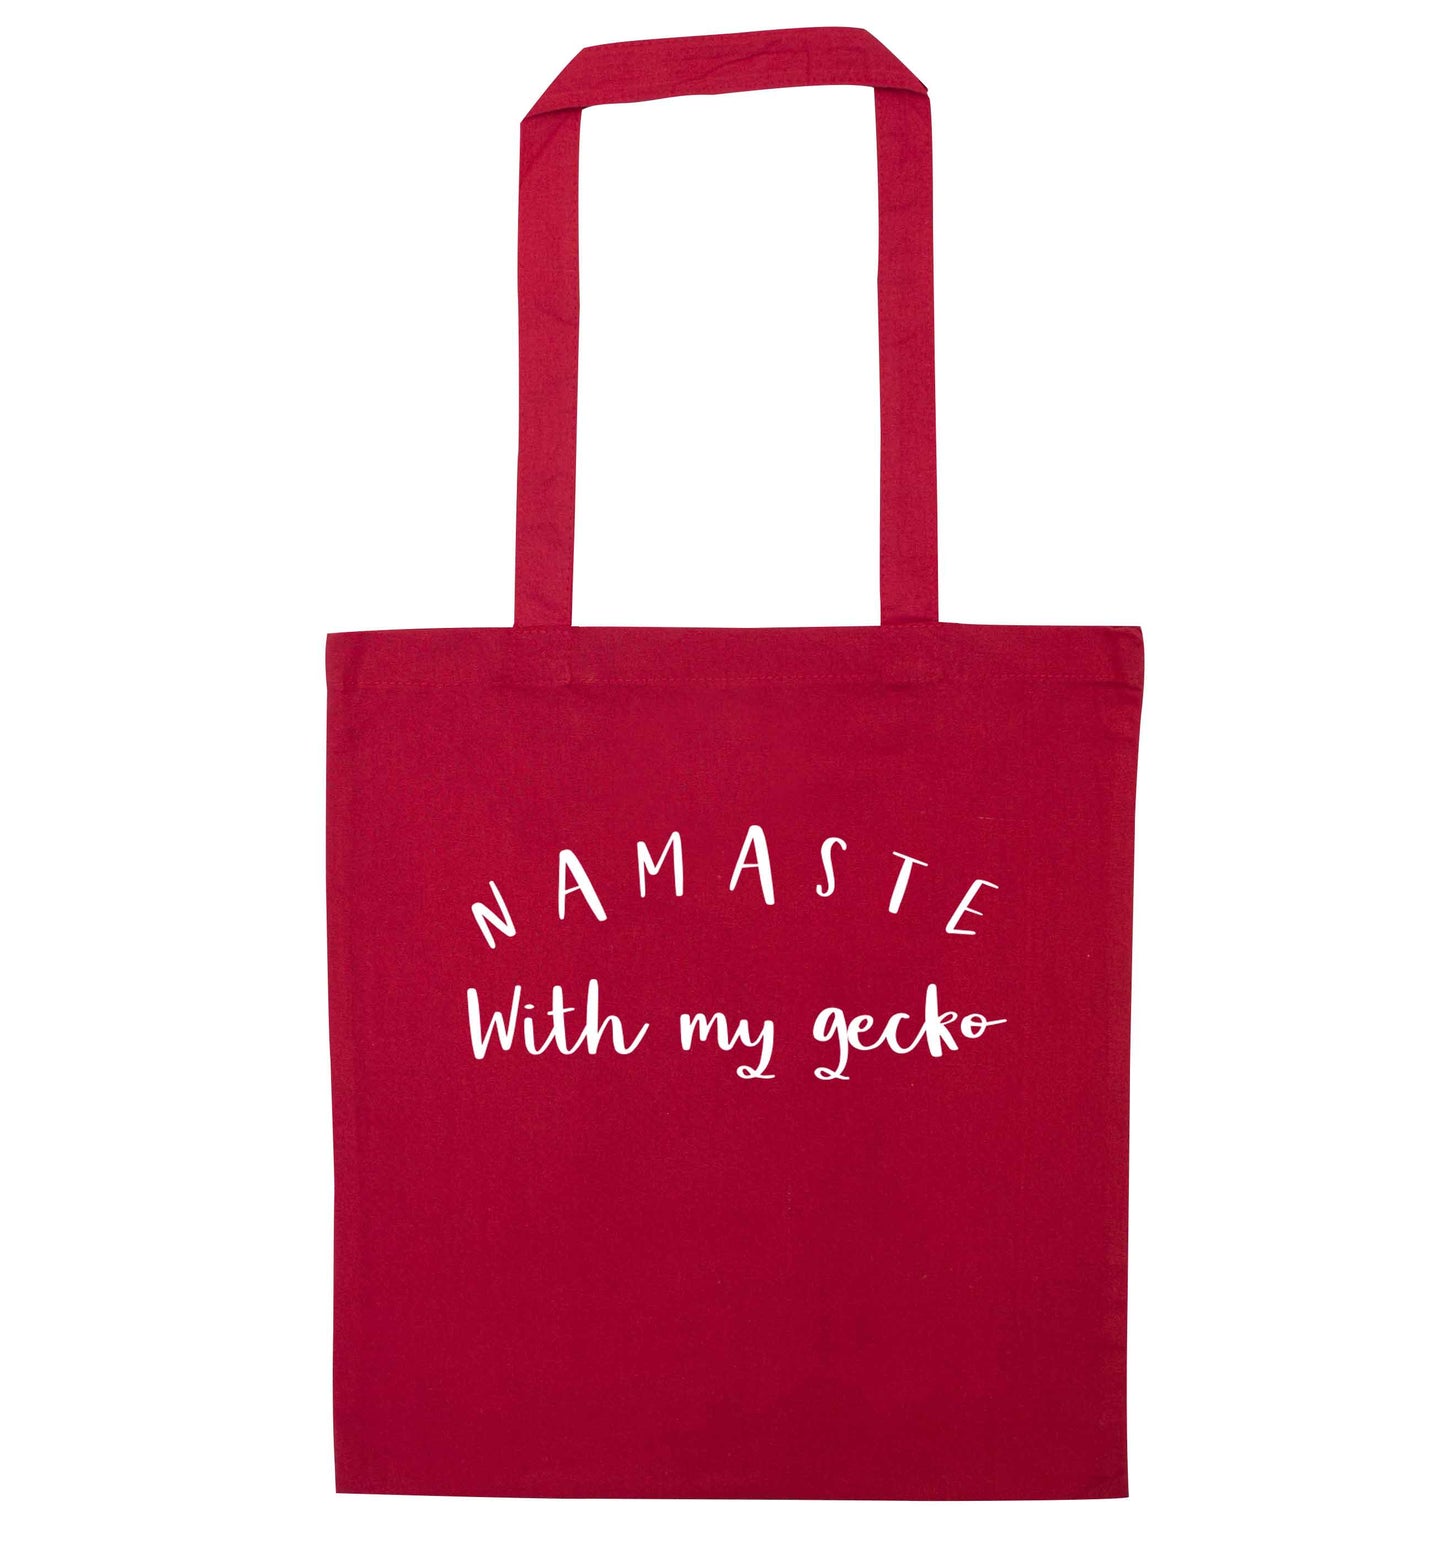 Namaste with my gecko red tote bag